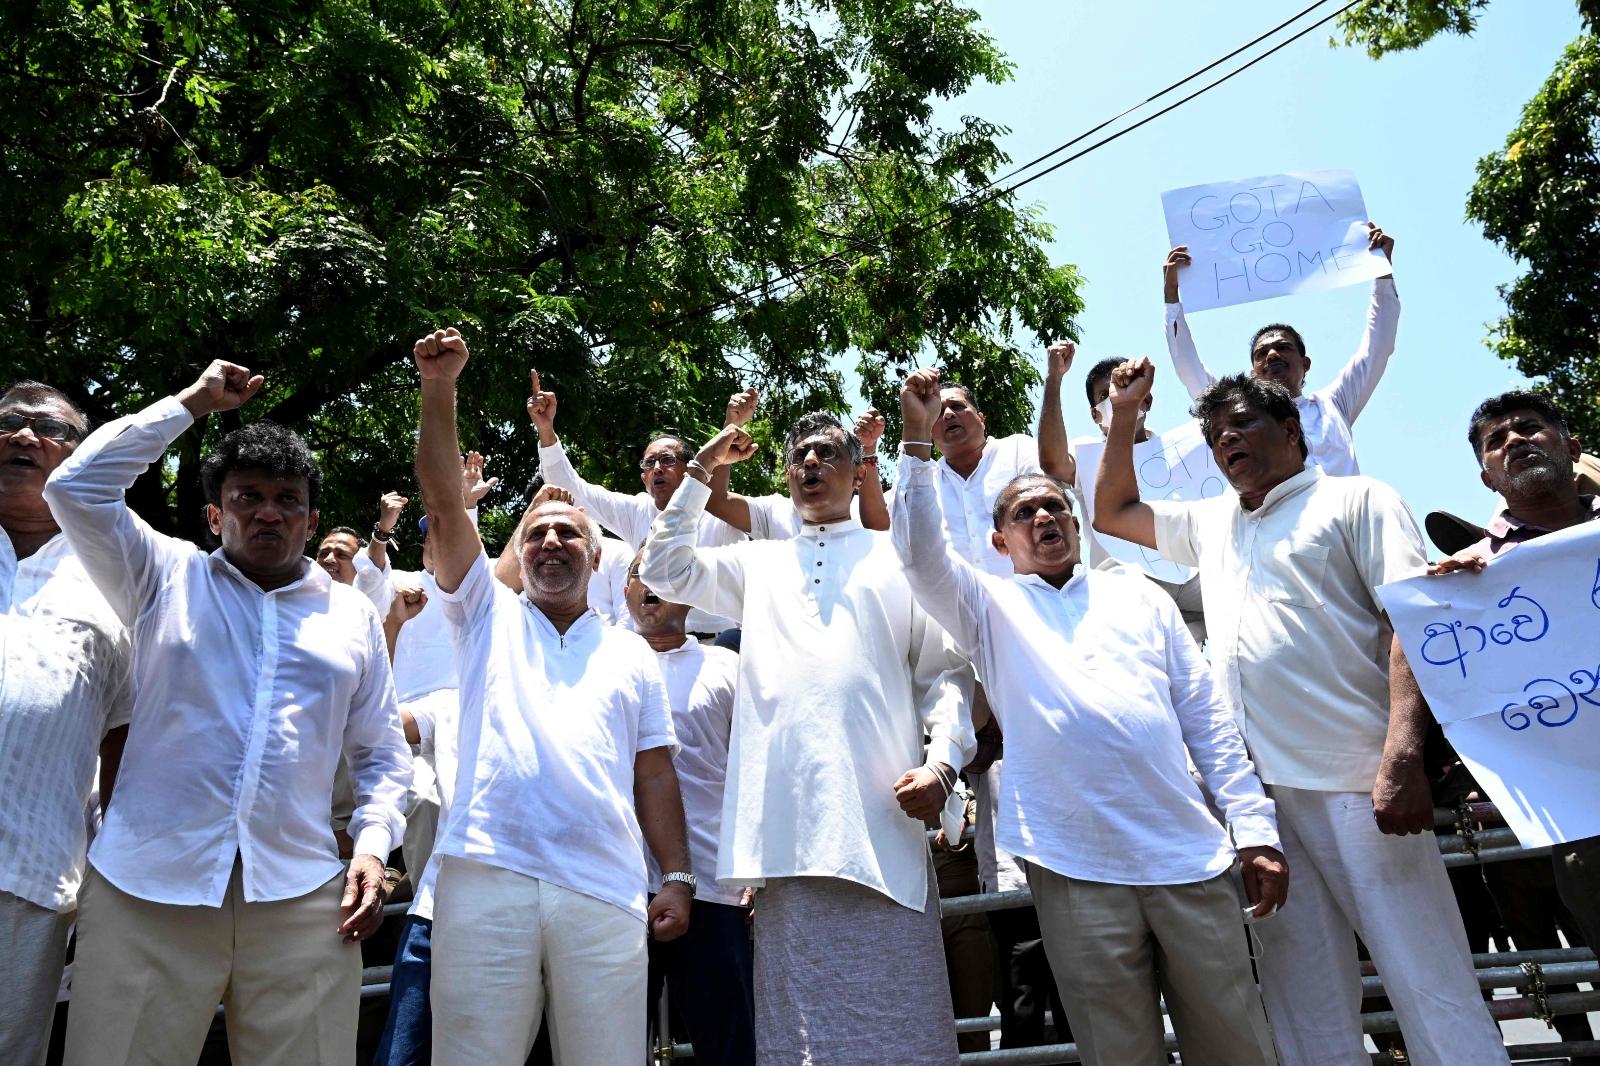 Sri Lanka's main opposition parliament members shout slogans as they protest in Colombo on April 3.